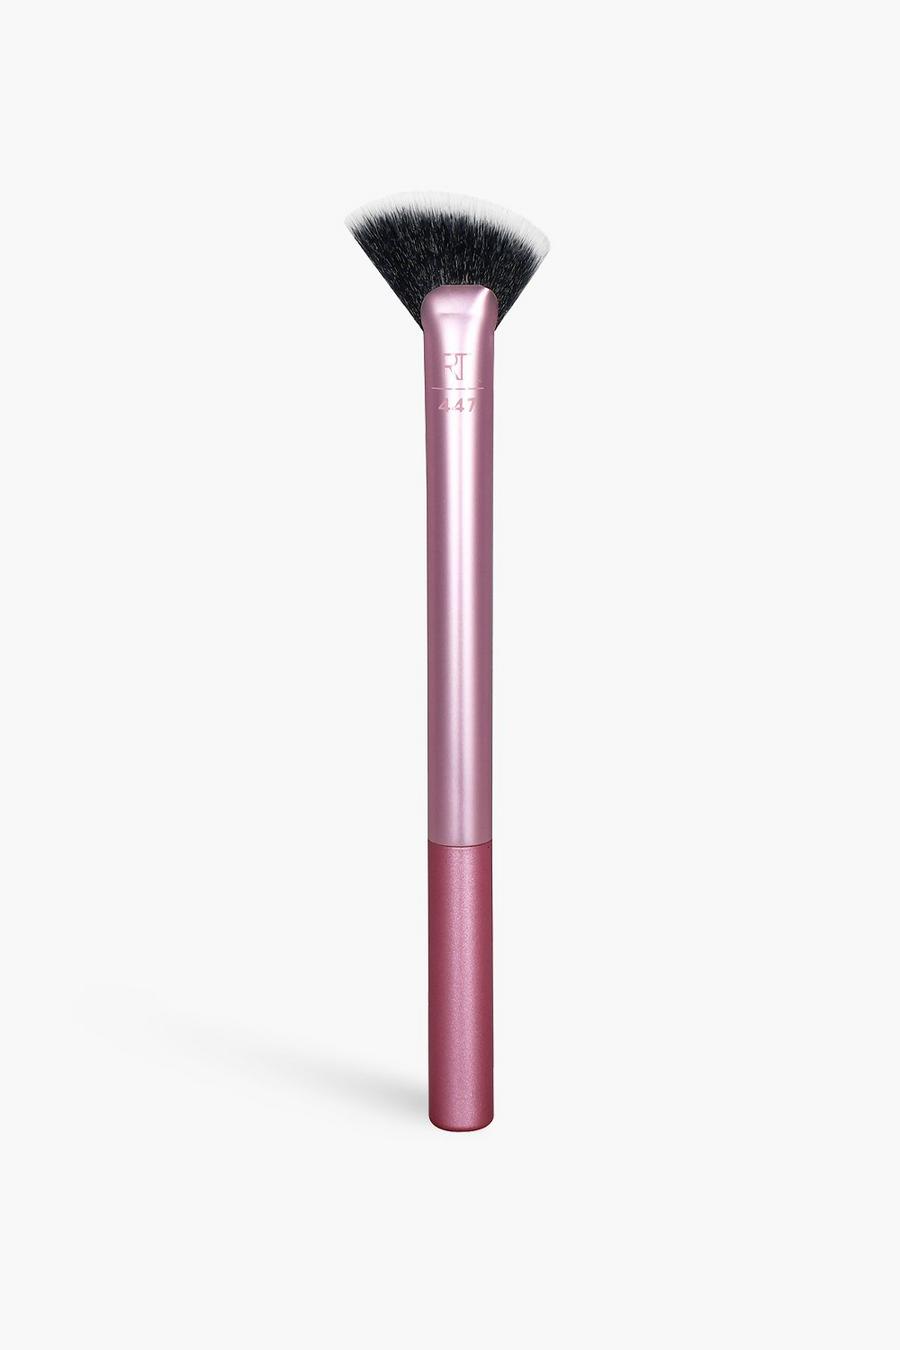 Rose gold metallic REAL TECHNIQUES RADIANCE FAN MAKEUP BRUSH